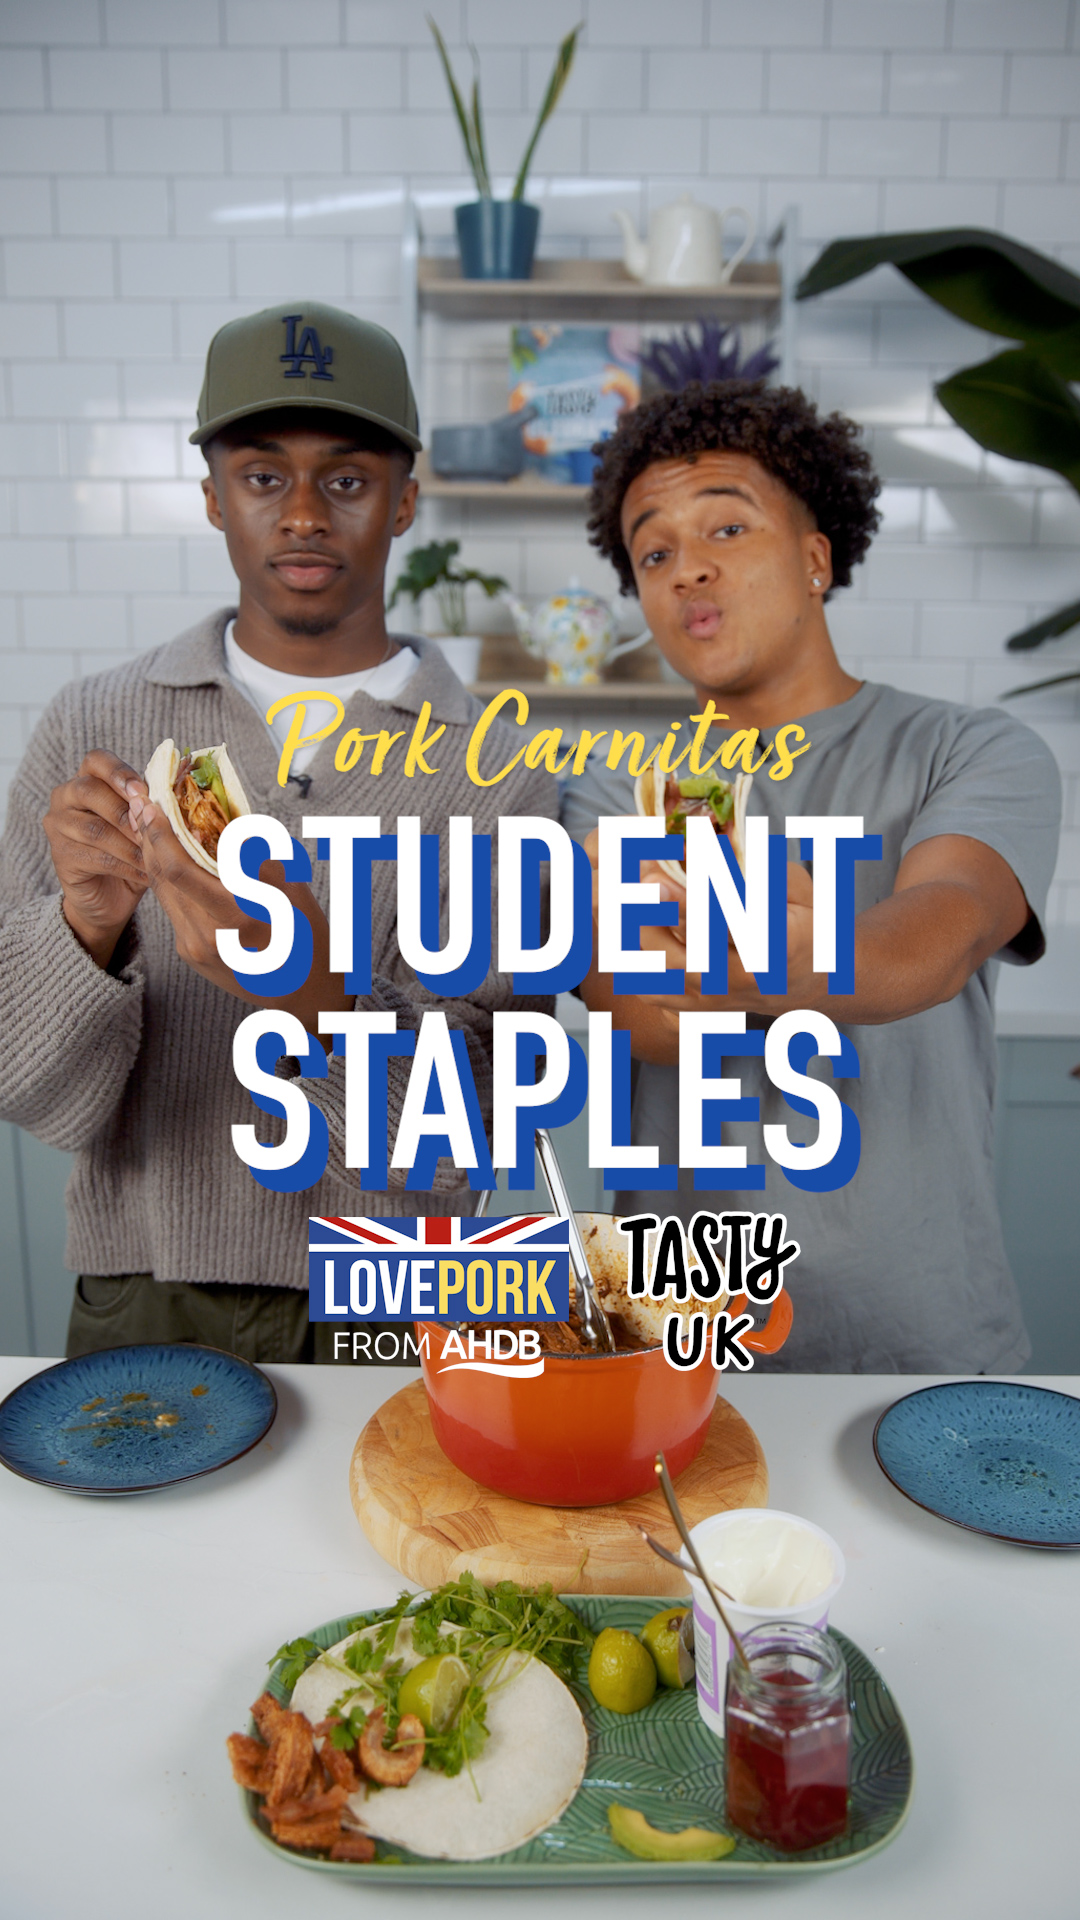 Video thumbnail for student staples series with Tasty UK